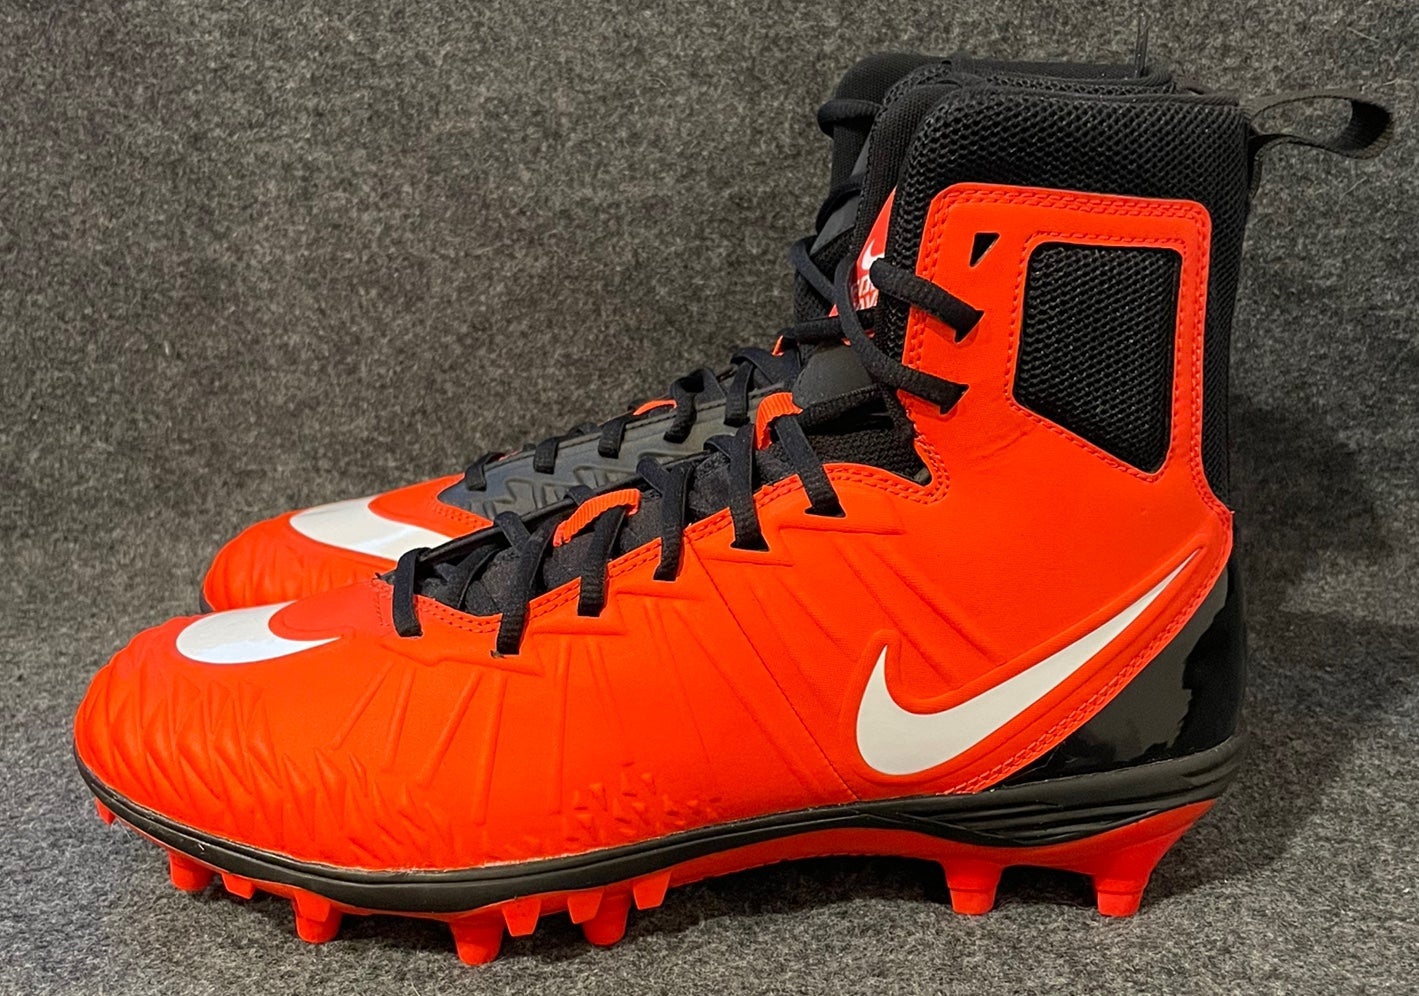 Details about   Mens Force Savage Elite TD Football Cleats Lacrosse Size 12.5 W Wide $140 A3 